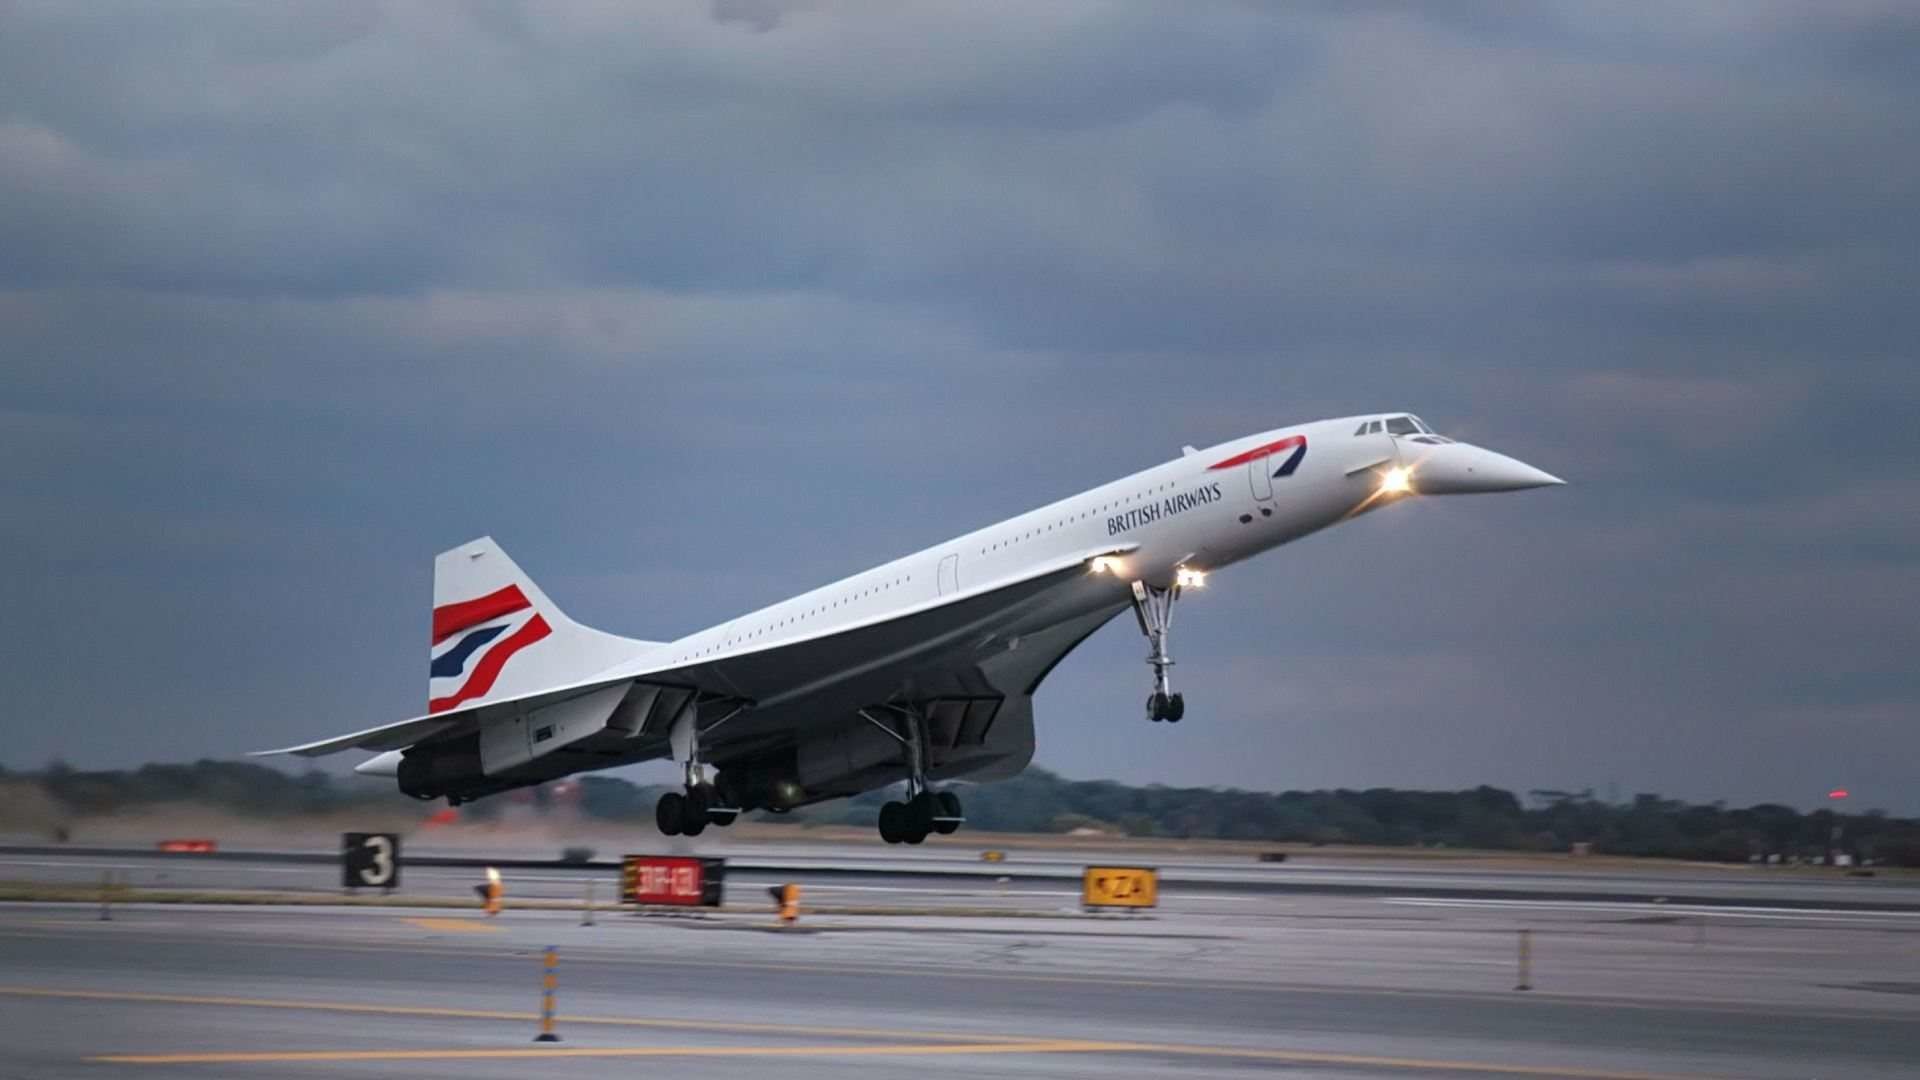 1920x1080 Top Wallpapers 2016: Concorde Wallpapers, Awesome Concorde .